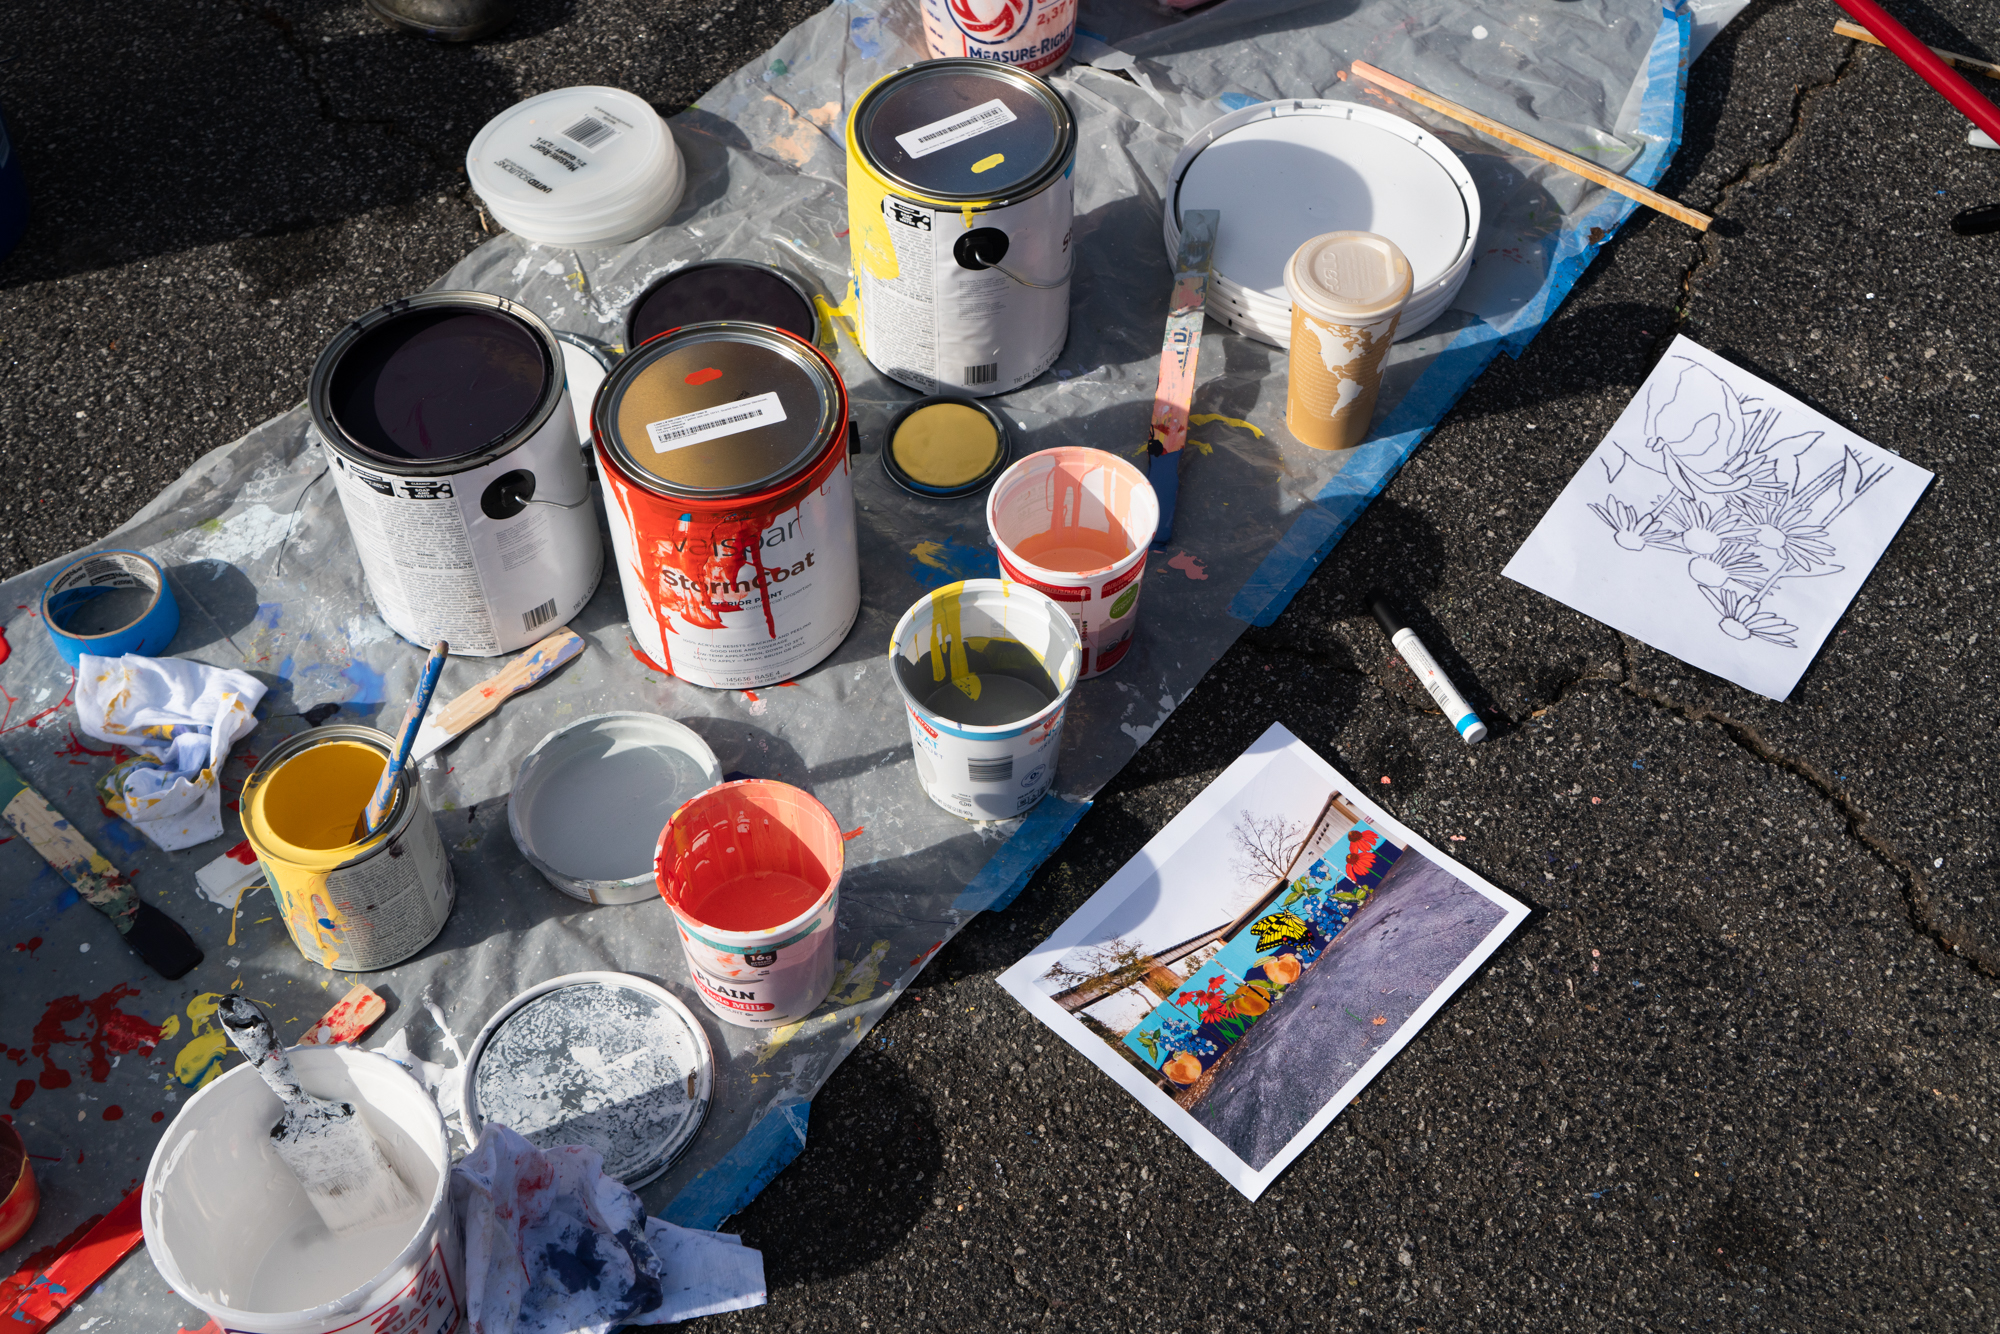 Photo: opened paint cans with a sketch of the mural design